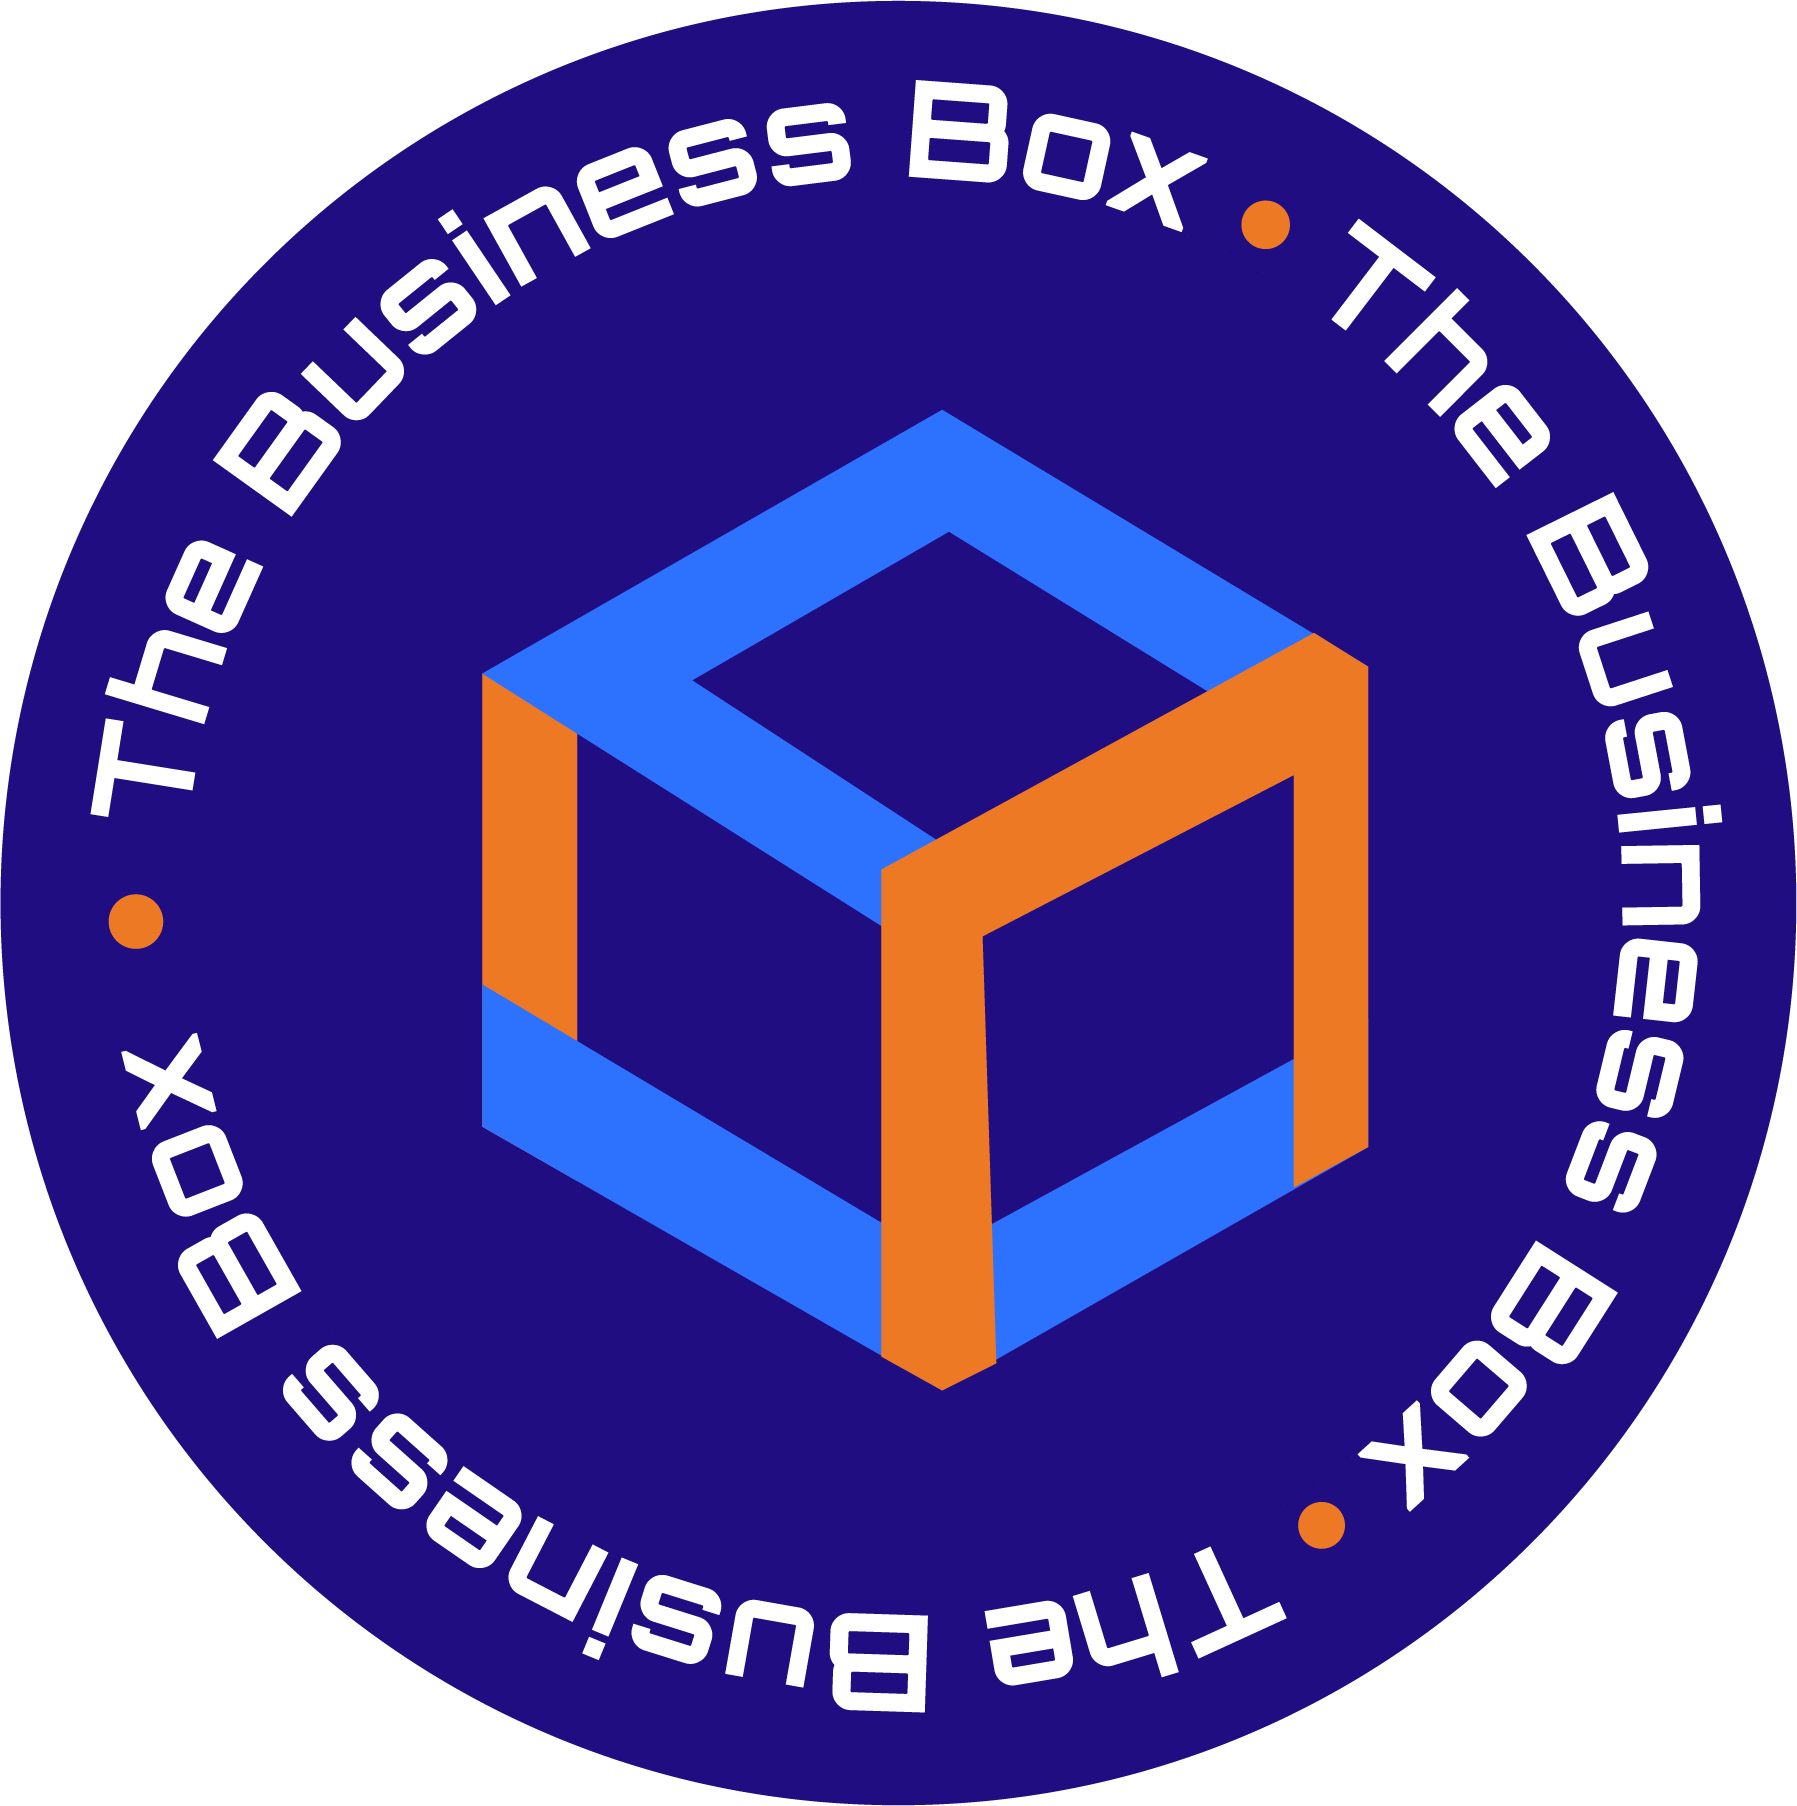 The Business Box